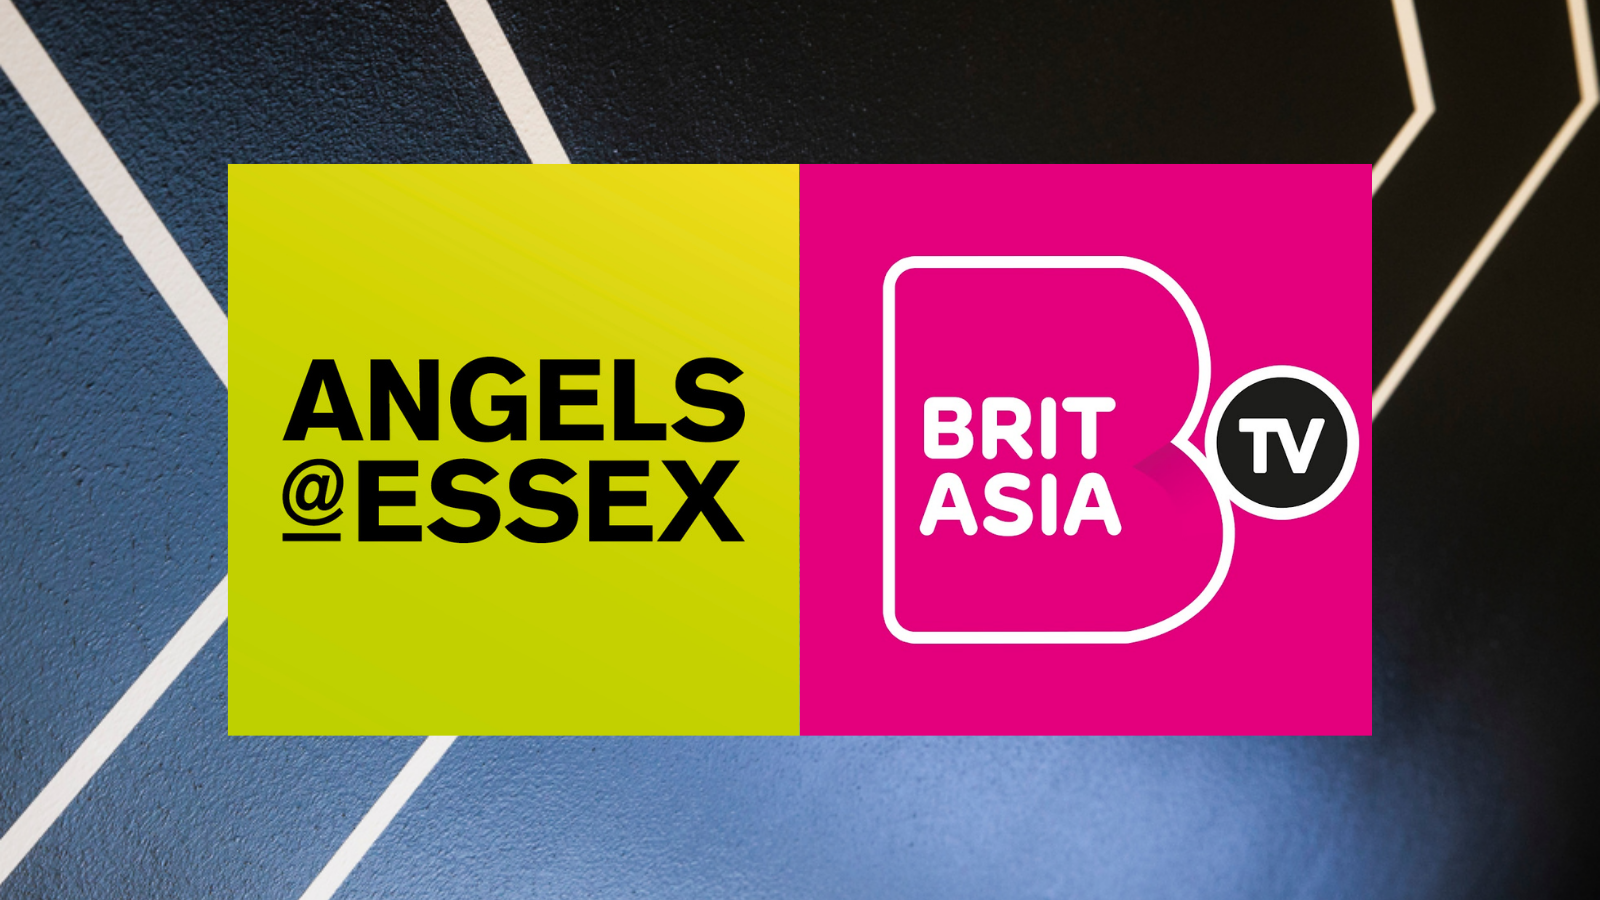 Meet the businesses whose pitches will be featured on TV - Angels@Essex and BritAsia TV